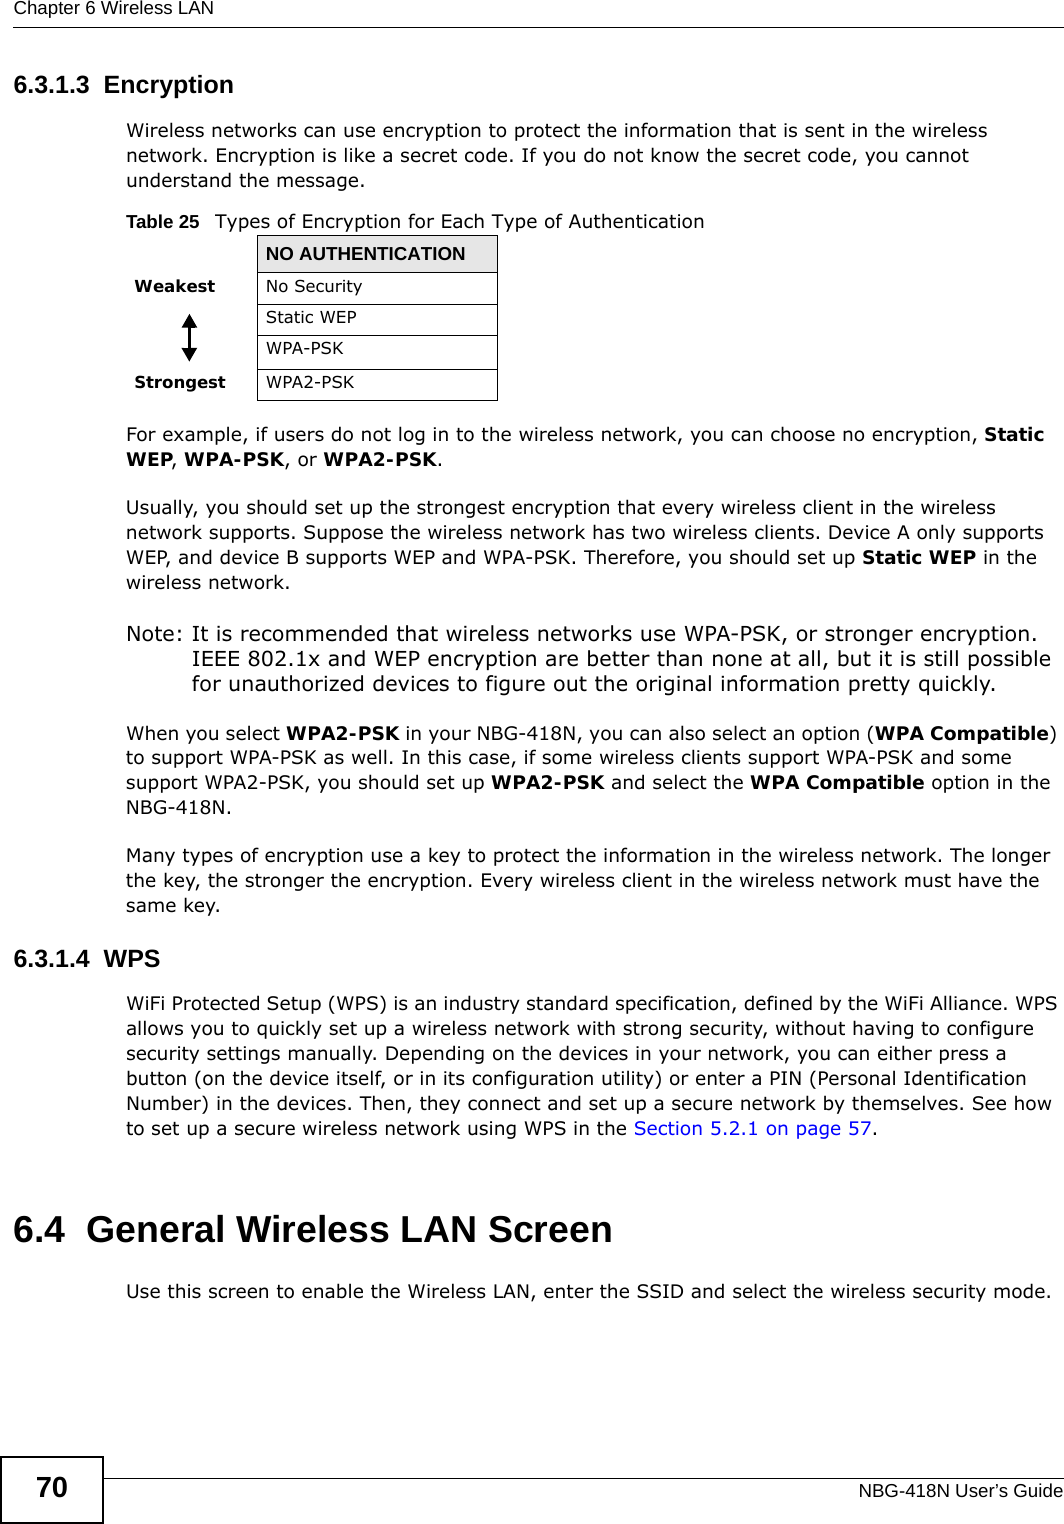 Chapter 6 Wireless LANNBG-418N User’s Guide706.3.1.3  EncryptionWireless networks can use encryption to protect the information that is sent in the wireless network. Encryption is like a secret code. If you do not know the secret code, you cannot understand the message.For example, if users do not log in to the wireless network, you can choose no encryption, Static WEP, WPA-PSK, or WPA2-PSK.Usually, you should set up the strongest encryption that every wireless client in the wireless network supports. Suppose the wireless network has two wireless clients. Device A only supports WEP, and device B supports WEP and WPA-PSK. Therefore, you should set up Static WEP in the wireless network.Note: It is recommended that wireless networks use WPA-PSK, or stronger encryption. IEEE 802.1x and WEP encryption are better than none at all, but it is still possible for unauthorized devices to figure out the original information pretty quickly.When you select WPA2-PSK in your NBG-418N, you can also select an option (WPA Compatible) to support WPA-PSK as well. In this case, if some wireless clients support WPA-PSK and some support WPA2-PSK, you should set up WPA2-PSK and select the WPA Compatible option in the NBG-418N.Many types of encryption use a key to protect the information in the wireless network. The longer the key, the stronger the encryption. Every wireless client in the wireless network must have the same key.6.3.1.4  WPSWiFi Protected Setup (WPS) is an industry standard specification, defined by the WiFi Alliance. WPS allows you to quickly set up a wireless network with strong security, without having to configure security settings manually. Depending on the devices in your network, you can either press a button (on the device itself, or in its configuration utility) or enter a PIN (Personal Identification Number) in the devices. Then, they connect and set up a secure network by themselves. See how to set up a secure wireless network using WPS in the Section 5.2.1 on page 57. 6.4  General Wireless LAN Screen Use this screen to enable the Wireless LAN, enter the SSID and select the wireless security mode.Table 25   Types of Encryption for Each Type of AuthenticationNO AUTHENTICATIONWeakest No SecurityStatic WEPWPA-PSKStrongest WPA2-PSK